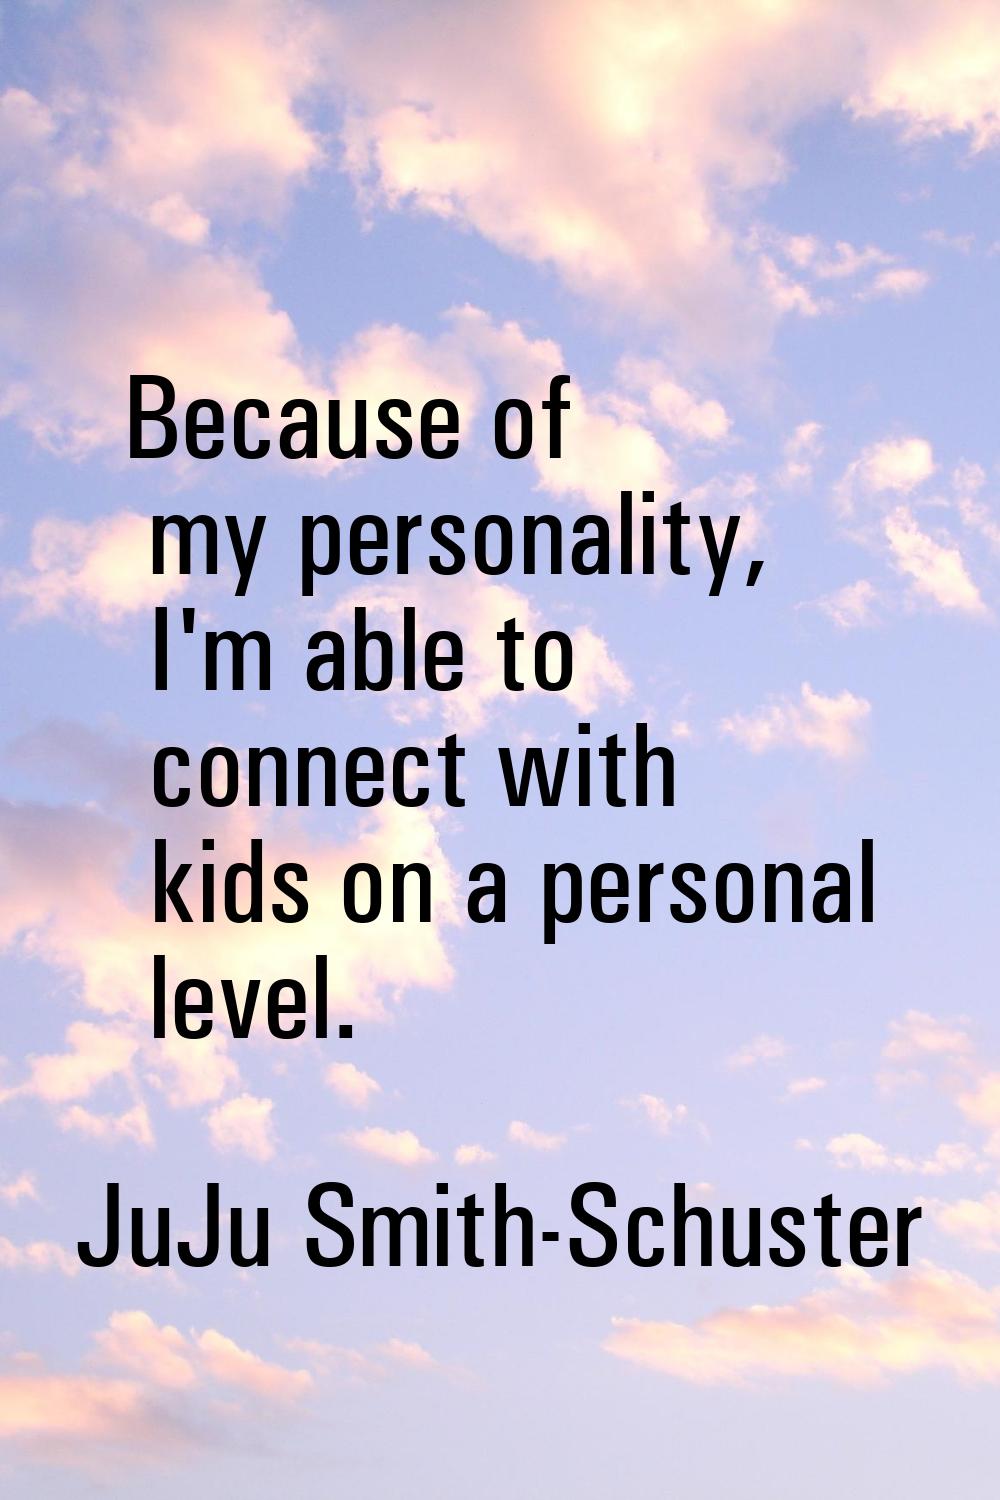 Because of my personality, I'm able to connect with kids on a personal level.